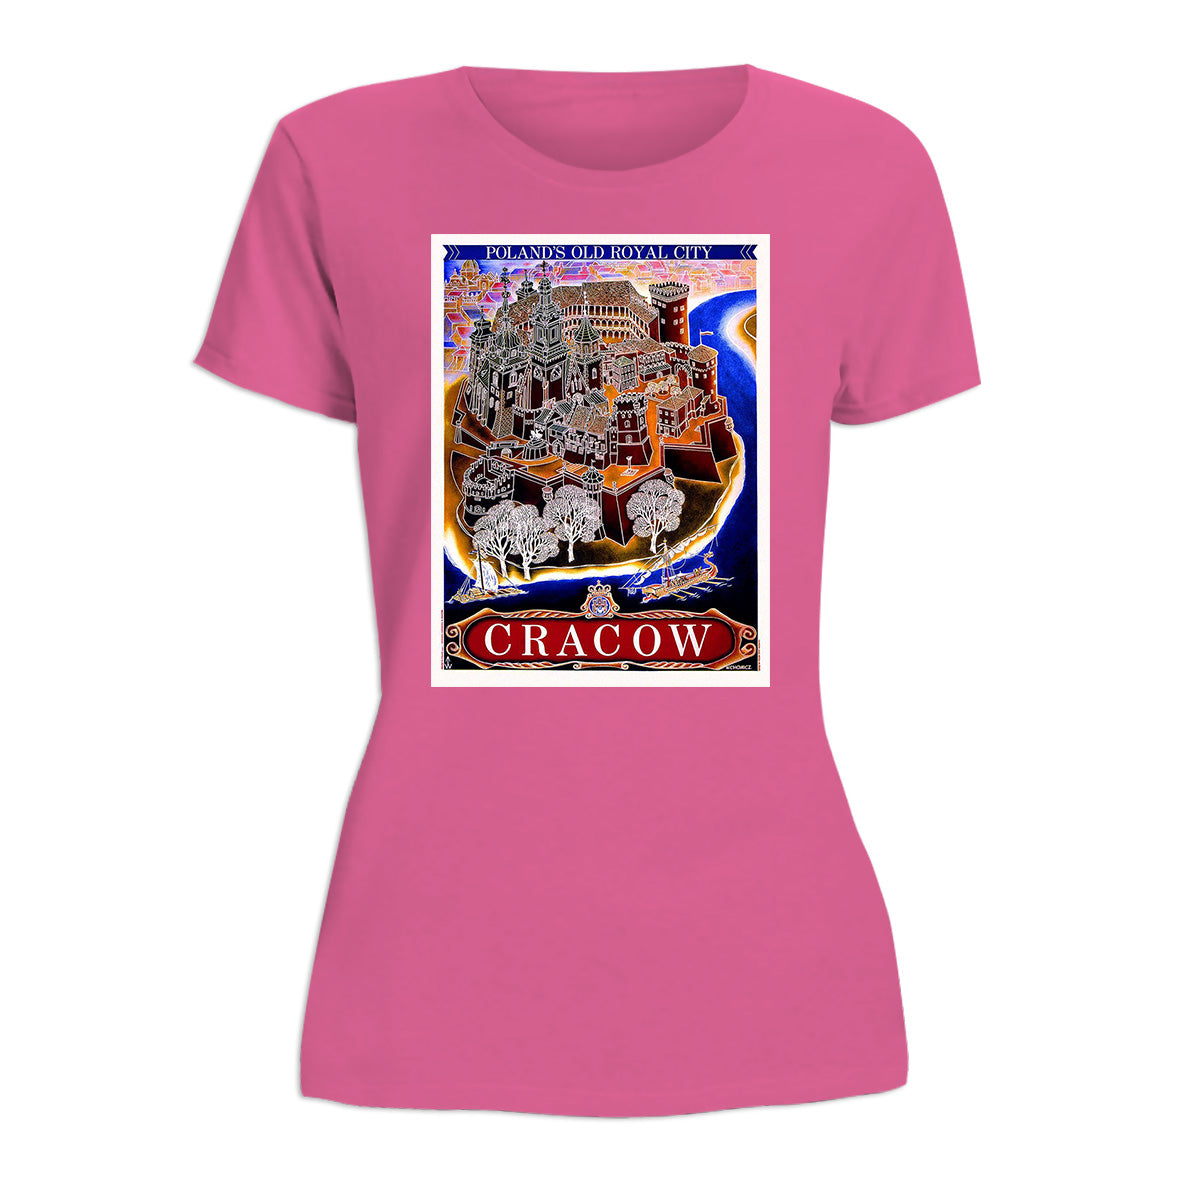 Vintage Poster Cracow PLs Old Royal City Women's Short Sleeve Tshirt